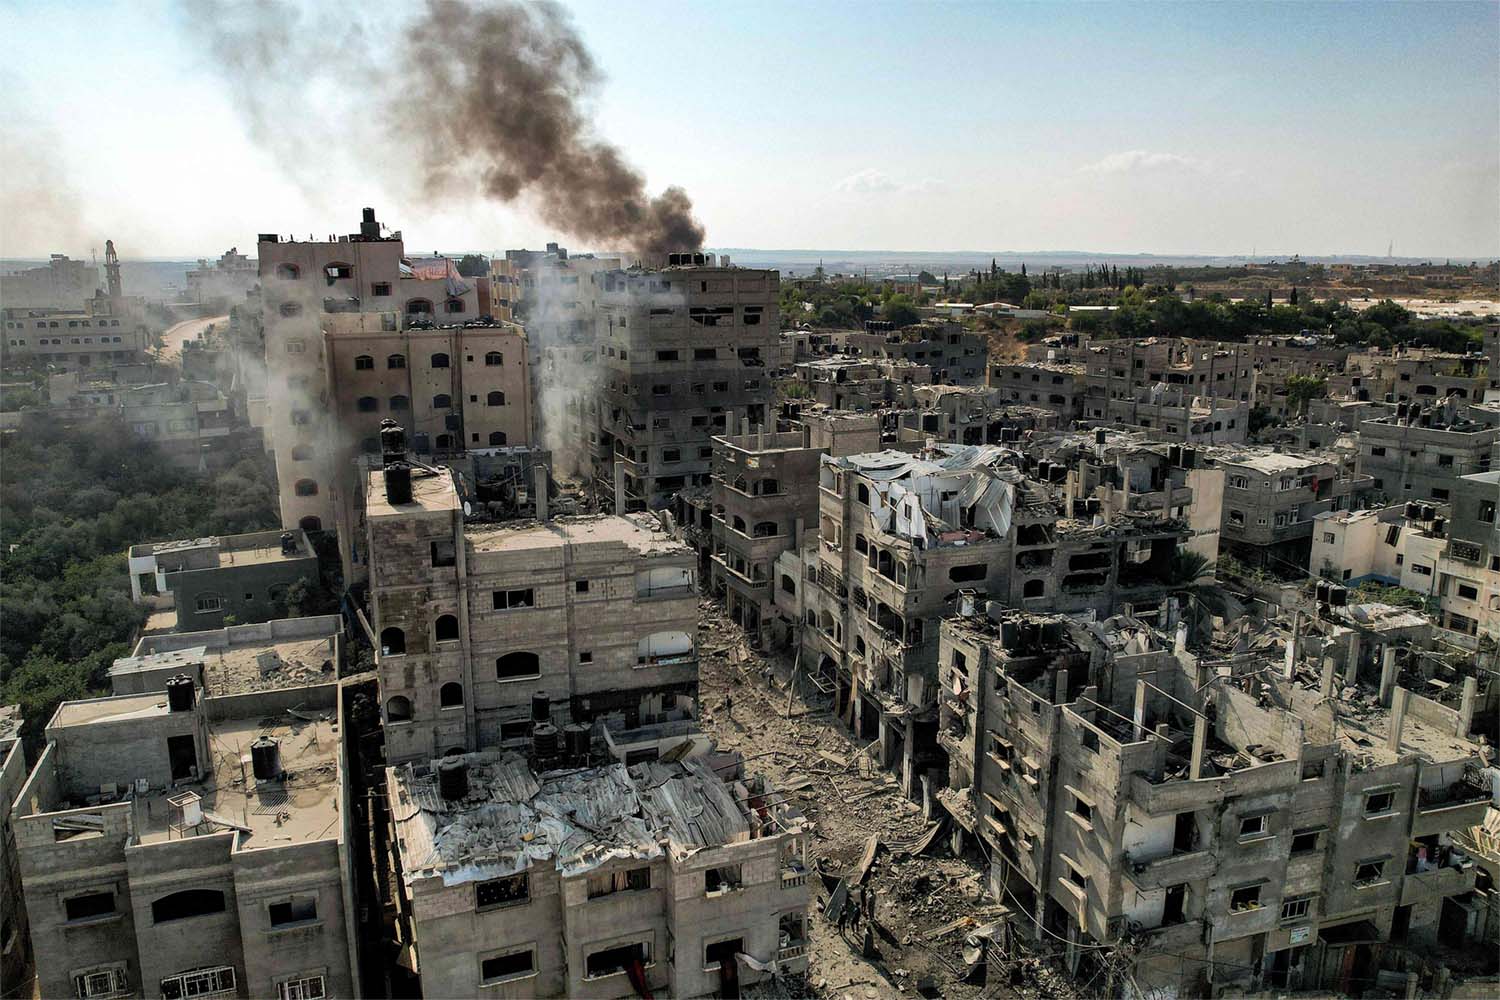 Buildings in Gaza flattened to the ground by Israel's bombardments